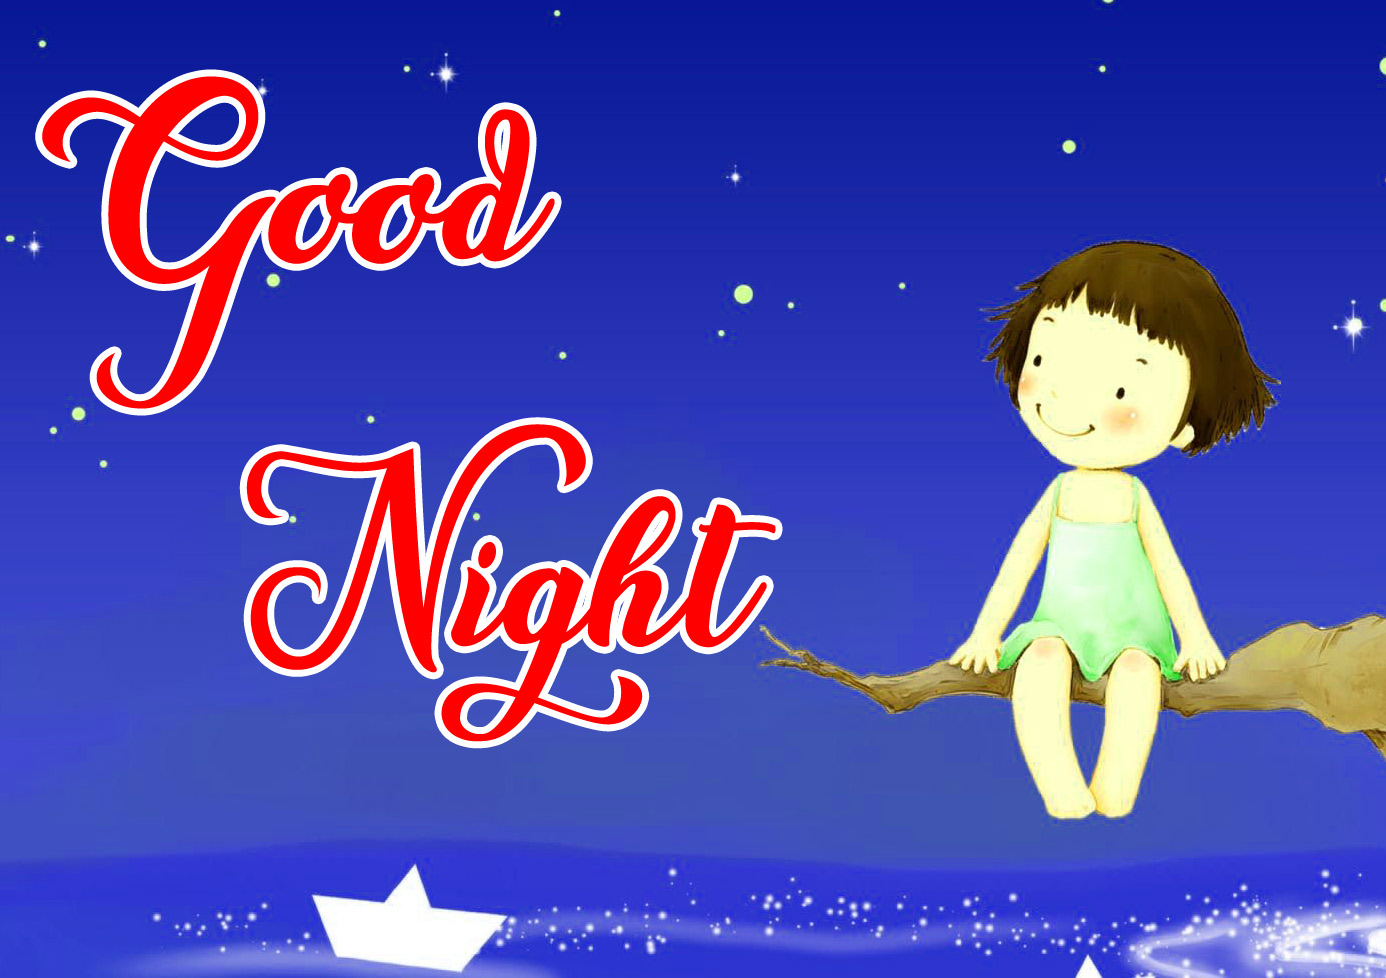 Good Night Images- 410+ Photo Pics Wallpaper Pictures For Whatsapp